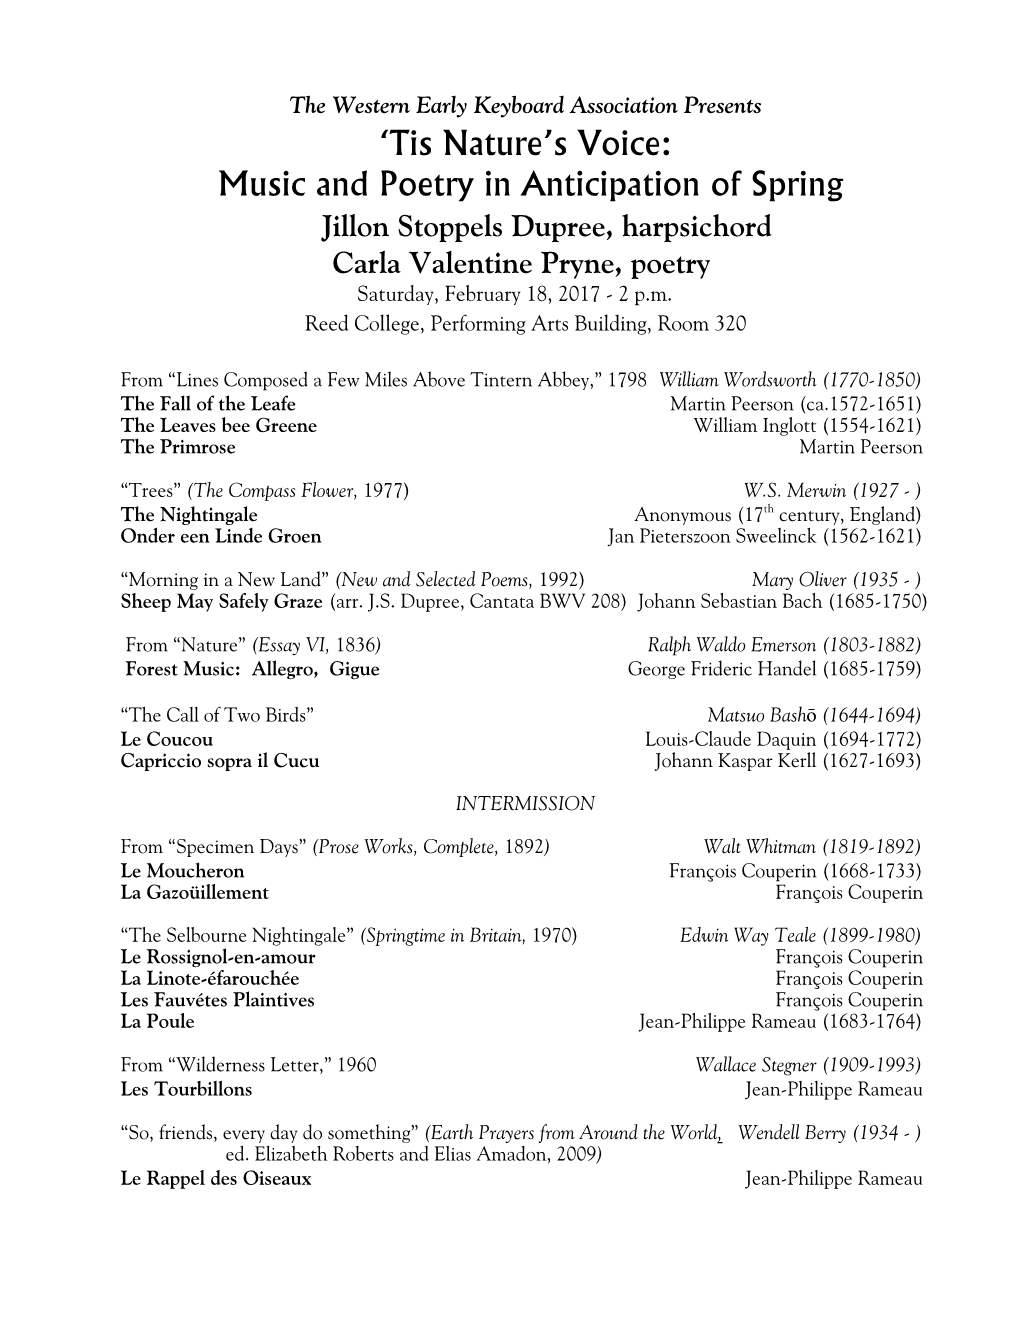 'Tis Nature's Voice: Music and Poetry in Anticipation of Spring